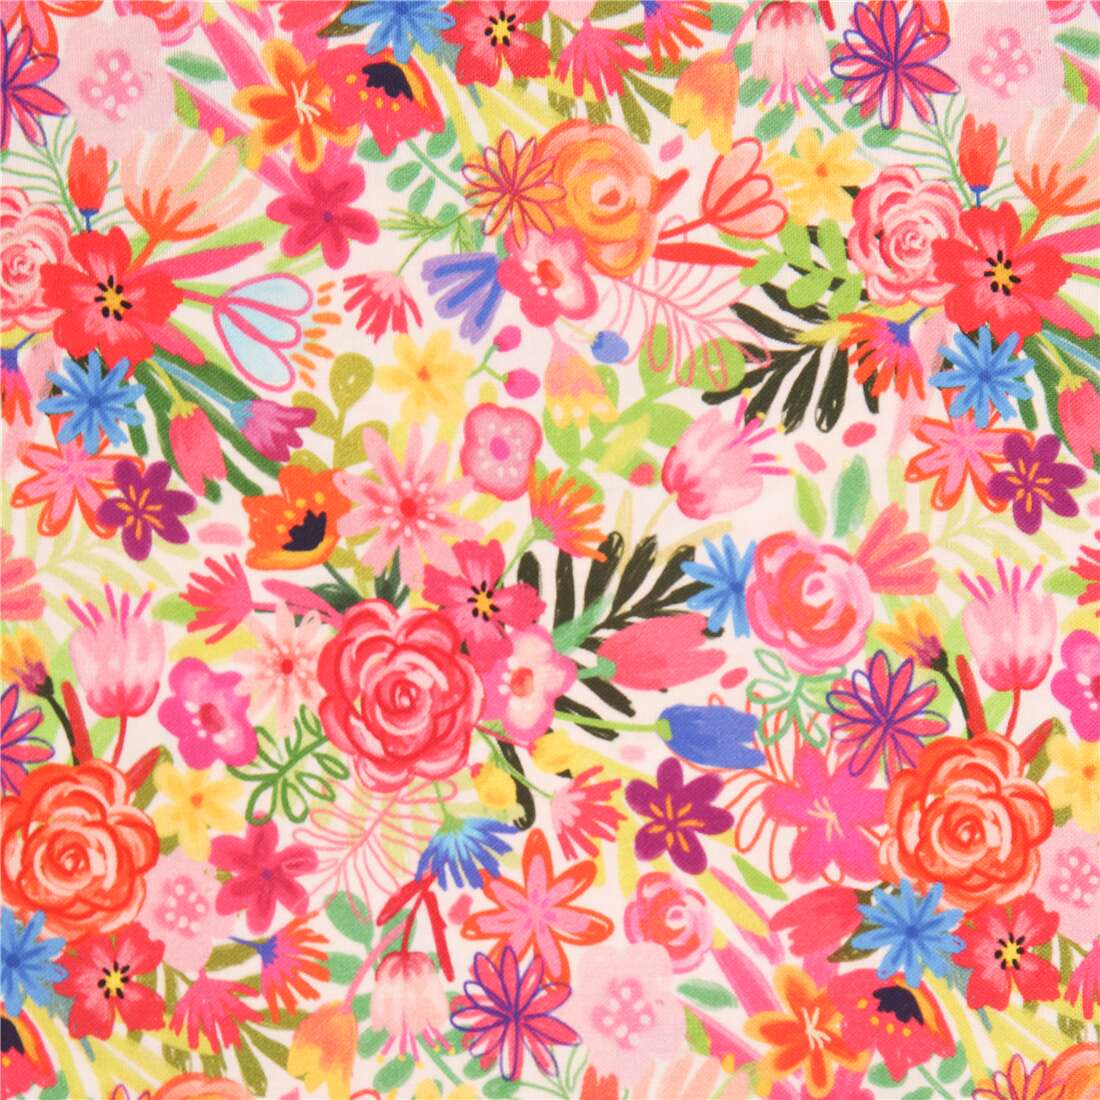 Cotton Flowers Fabric Bright Floral Fabric Rainbow Floral Cotton Fabric Fabric By The Yard Floral